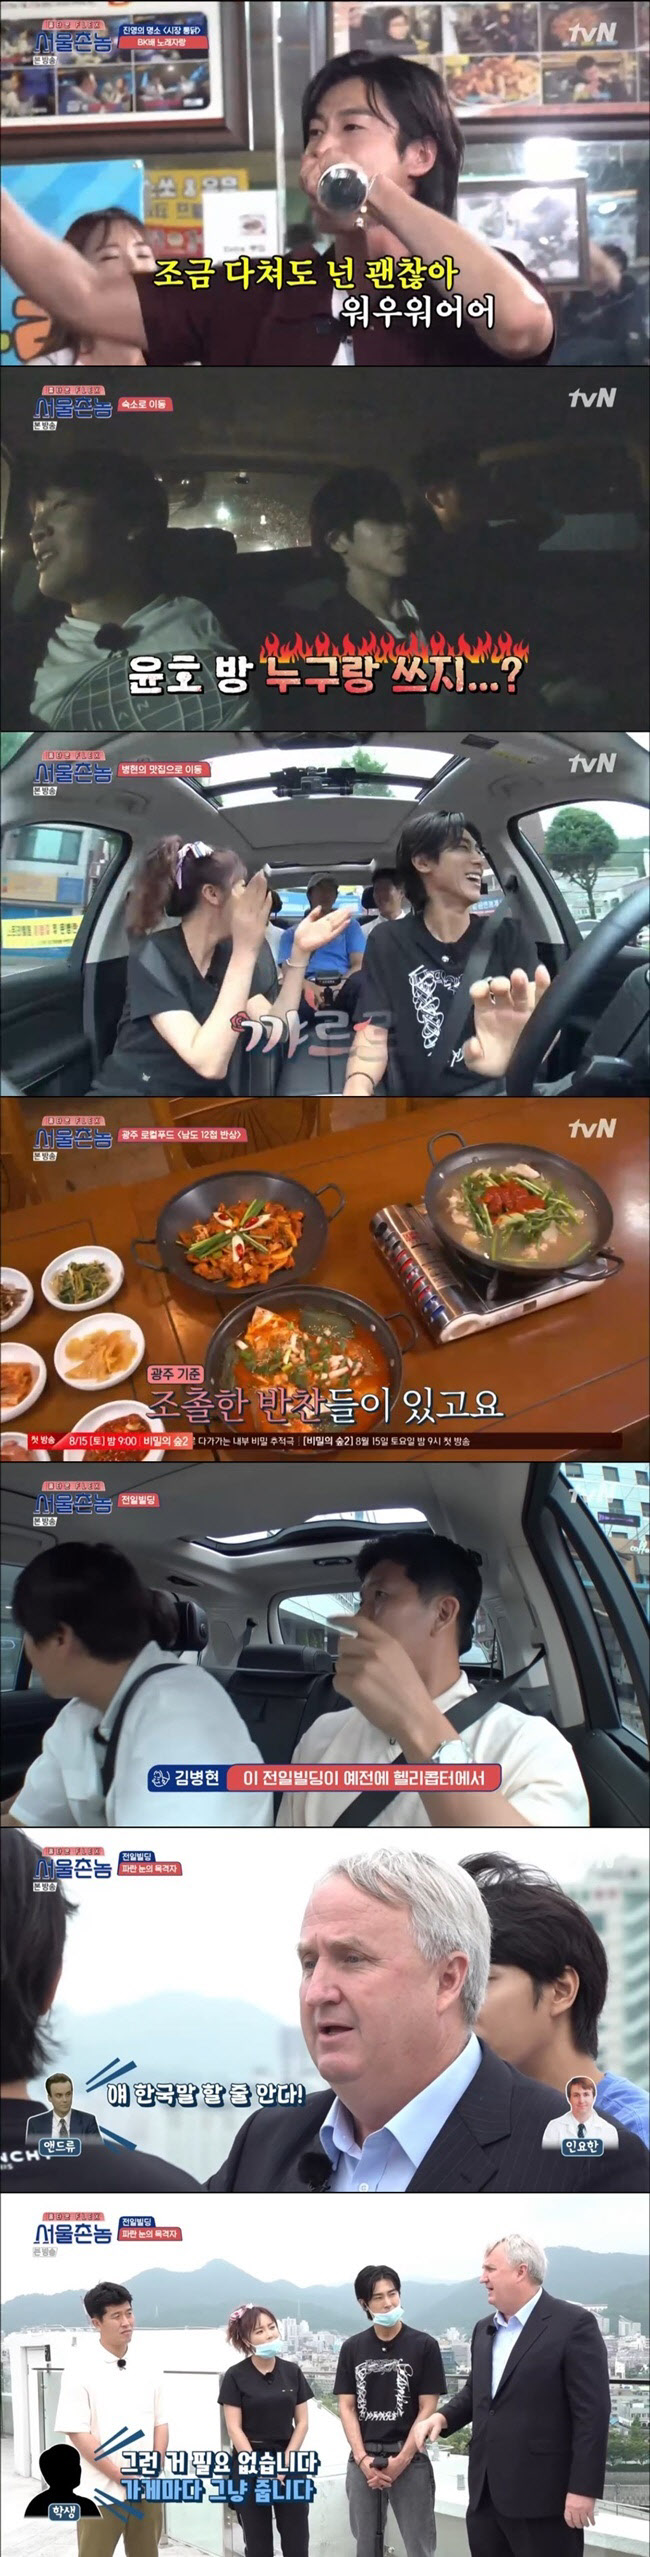 Hong Jin-young, Kim Byung-hyun, and Yunho gave memories of the Gwangju tour, which captures fun and meaning.The members went to the chicken house after eating the oritang recommended by Hong Jin-young and Yunho.Cha Tae-hyun and Lee Seung-gi were surprised to eat something else, but Hong Jin-young relaxedly predicted that the delivery goes in.In fact, Cha Tae-hyun and Lee Seung-gi, like Hong Jin-young, continued to eat chicken, saying that they could not stop their hands, and said to Hong Jin-young, I apologize.At the chicken house, Kim Byung-hyuns night was played and the song was proud. Yunho said, I was just going to sing it (Ill do it right).First, the confrontation between Hong Jin-young and Lee Seung-gi.Hong Jin-young won Kim Yeon-jas Amor Party and Lee Seung-gi won the You can do it by Kangsan.The next showdown was between Cha Tae-hyun and Yunho; when Cha Tae-hyun scored 91 points for the resurrection Lonely Night, Yunho selected a song that seemed to be a song.Yunhos singing, which burned to the point of selecting his own song, unfortunately scored 85 points, and was defeated by Cha Tae-hyun.After a long time together, they finished Haru, but Yunho made everyone goosebump with passion, leaving the saying, Its the beginning.In the meantime, he said, Lets look back on Haru today. He briefed himself and caused everyone to sleep.At that time, Hong Jin-young asked, Who do you use room with? Lee Seung-gi quickly stepped out, saying, I am not.Lee Seung-gi was the one who shared the room with Yunho, and Lee Seung-gi laughed, pleading, I like all the good things, but lets do all the good stories here.After the honey-sleeping, the members started the second day of their trip to Gwangju; Kim Byung-hyuns restaurant added to the expectation with a local restaurant that Yunho also knew.Yunho expressed regret and said, I feel sorry for one night and two days.If you are sorry, lets catch Haru more, Cha Tae-hyun said, At this point, Hometown Flex  seems to be the goal of getting tired and not being able to come here.Kim Byung-hyun had members India for the 12th South Island half-size local restaurant; it couldnt just give them food.Last night, the members who wrote their necks in karaoke were sighing at the morning song boast.The sigh was also briefly immersed in the game, Hometown Flex team used Daegu Tang, and Gwangju local team used stir-fried meat.Hong Jin-young was in love with the taste of the fish, and Lee Seung-gi, who ate the Daegutang, admired that it is really delicious to not eat fish stew well.In addition, he visited Chungjang-ro, which symbolizes Gwangju youth. Yunho recalled his past memories, saying, It is a post office where we gathered.In Chungjangro, Hong Jin-young was the most delicious bakery in Gwangju, and India members; Yunho found dinosaur eggs as soon as he entered the bakery.Hong Jin-young and Yunho showed a excited face as the most eaten bread in their childhood.InJohn was angry at the news that the singer was coming late at the event and waited to see his face.The singer said Hong Jin-young was embarrassed by Hong Jin-young.Mr. Hong Jin-young came and ripped the stage with the Battery of Love, said John.I became a fan from that time. Hong Jin-young said he was sorry that he had only five schedules at the time.Kim Byung-hyun, Yunho, and Hong Jin-young gathered their mouths and found a restaurant in Dongas, a restaurant in Chungjangro.Hong Jin-young, who visited the restaurant for a long time, said, It used to look like a Kyungyang house.In order to save memories, the production team gave the menu to the members in the past.Yunho said that the soup before Dongas was a specialty of the house, and Hong Jin-young told her about her school days when she was engaged in a charm operation to receive soup infinite refills.Yunho said, There were a lot of family members, but there were a lot of women and men. The Dongas restaurant was a mecca for the meeting.I actually heard the camp here, Hong Jin-young said, but it wasnt bad in those days.When I came out of town, my juniors followed me. The next course was the Yunho attraction Mudeungsan, which members disliked during the news of the Mudeungsan mountaineering, and Yunho said, It takes less than two hours to get to the middle.After the struggle, Lee Seung-gi and Hong Jin-young succeeded in escaping Mudeungsan climbing and bought envy of everyone.Cha Tae-hyun, Kim Byung-hyun left Yunho and Mudeungsan tourKim Byung-hyun wished for a second life.Yunho showed off his enthusiasm for John is the next one in Jeolla province and Cha Tae-hyun laughed at it.